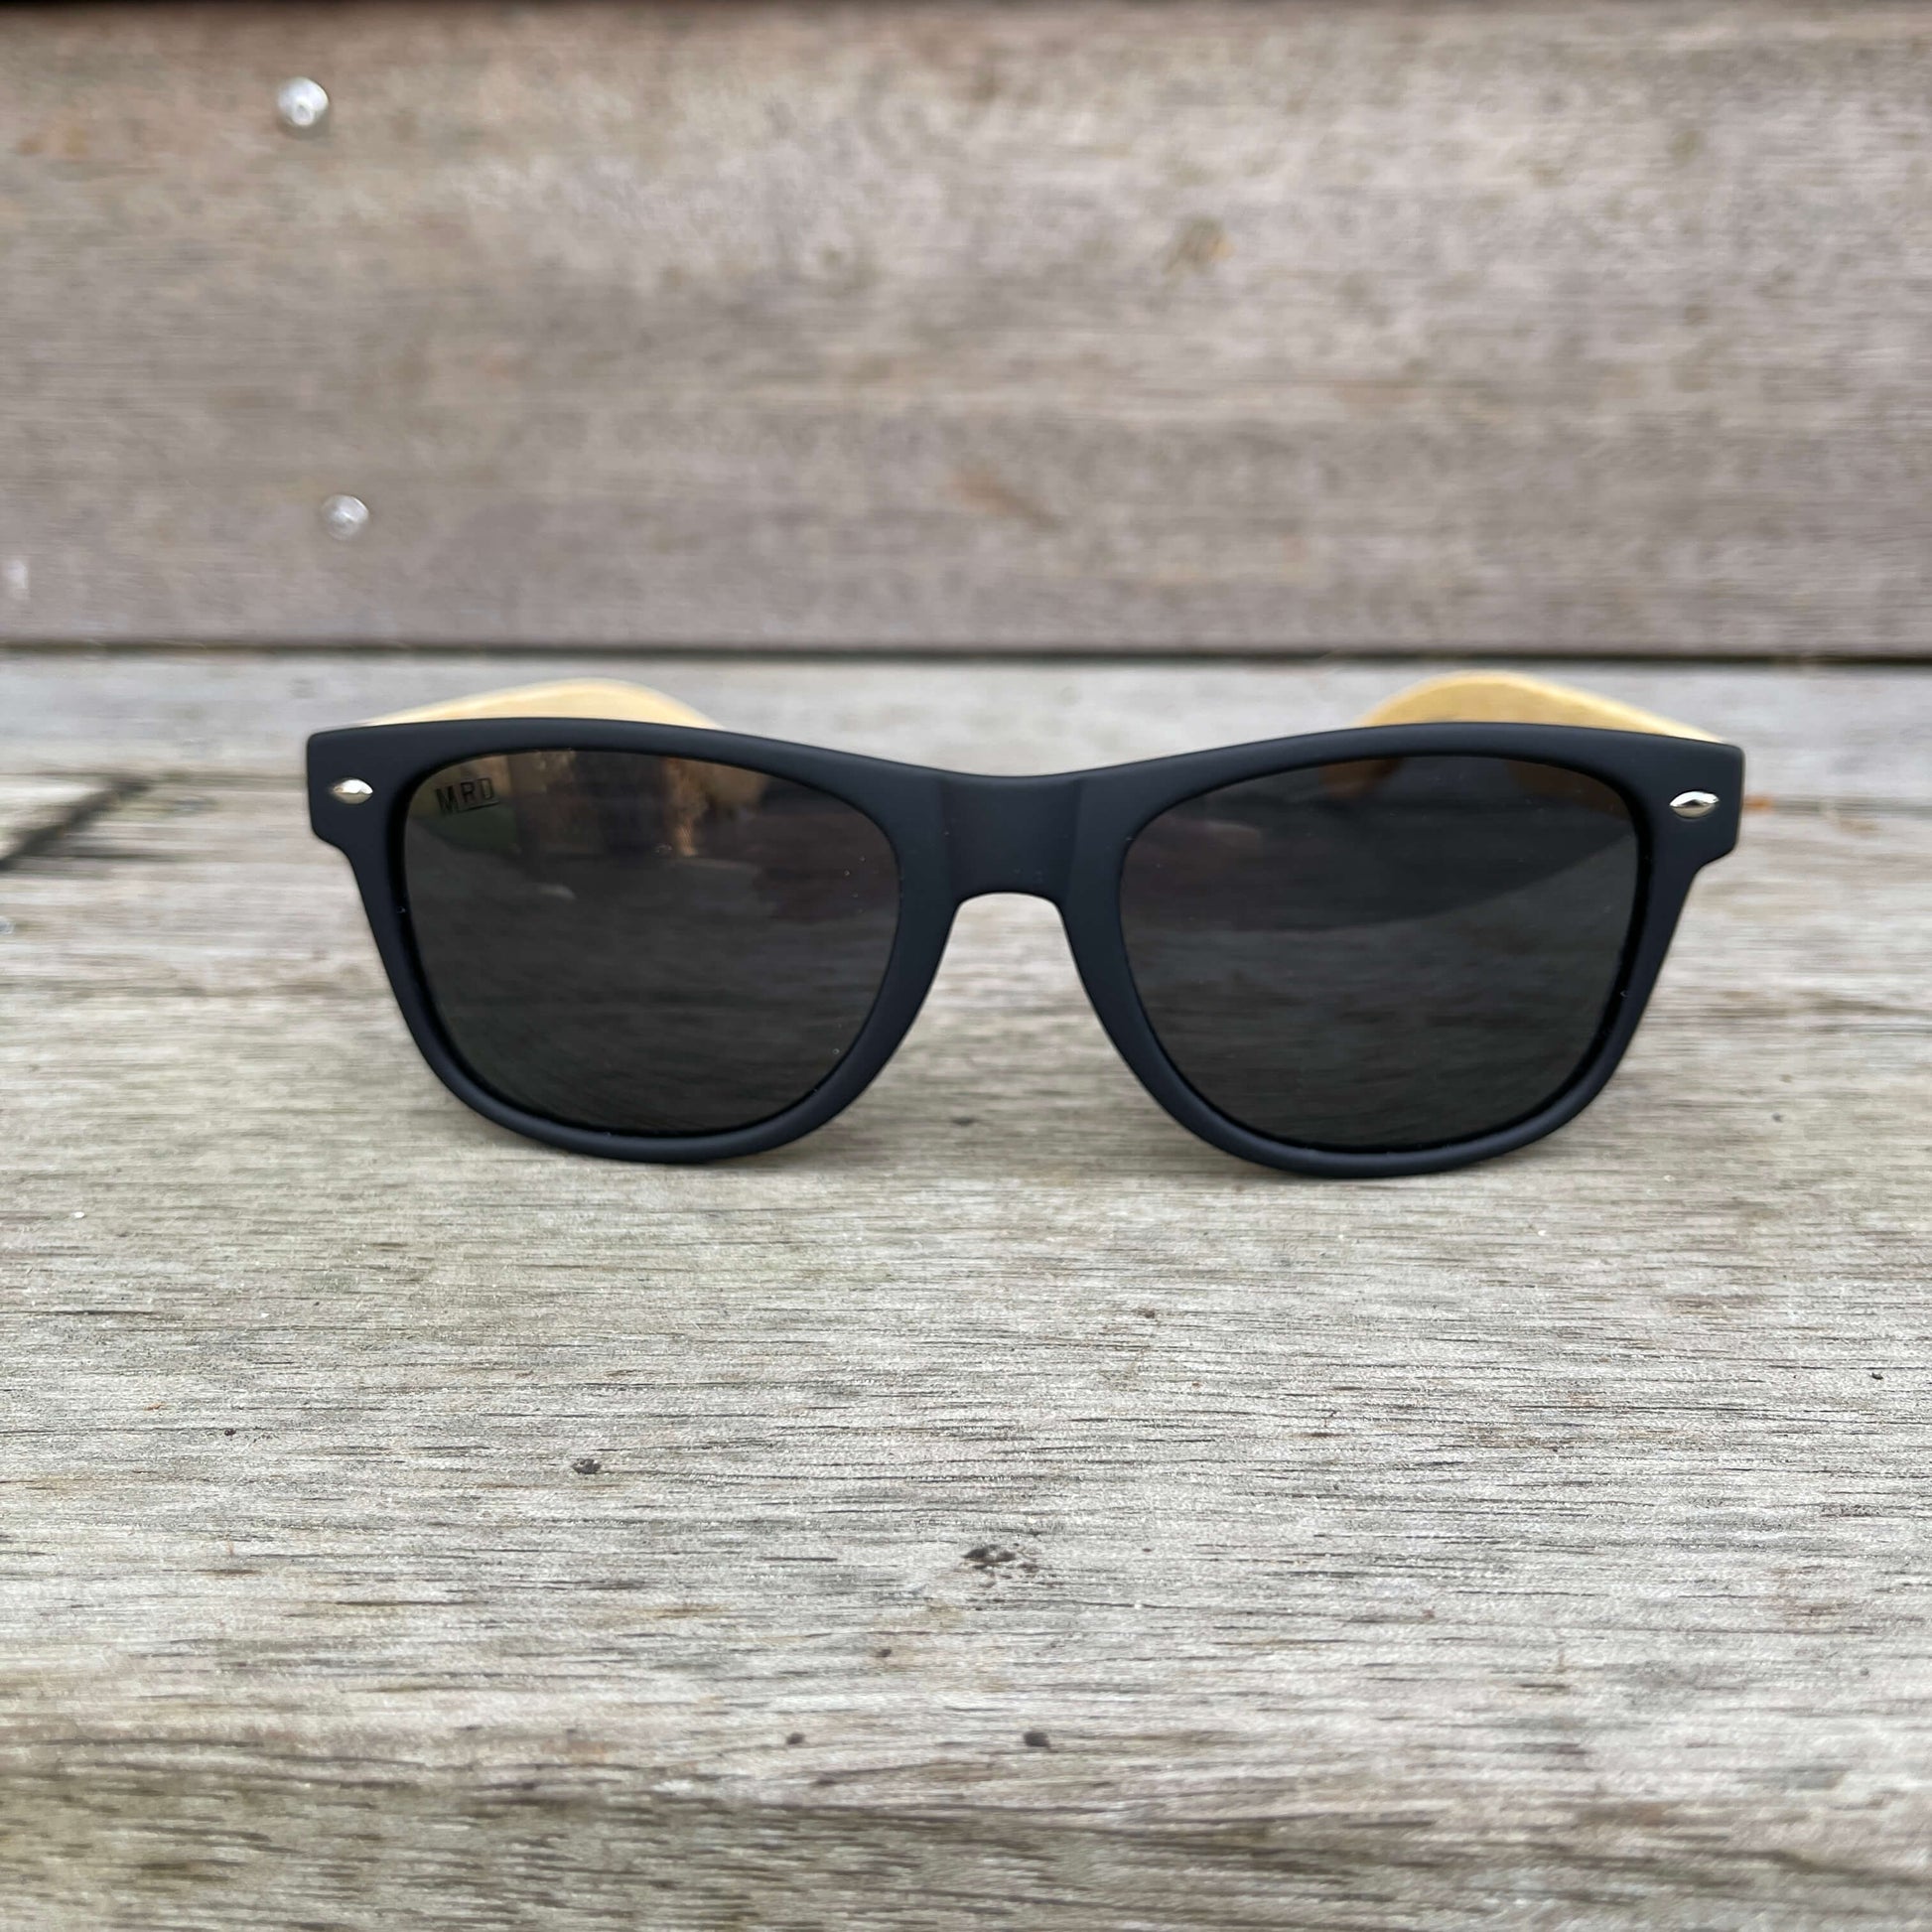 Sunglasses with wooden arms, black frames and dark lenses.